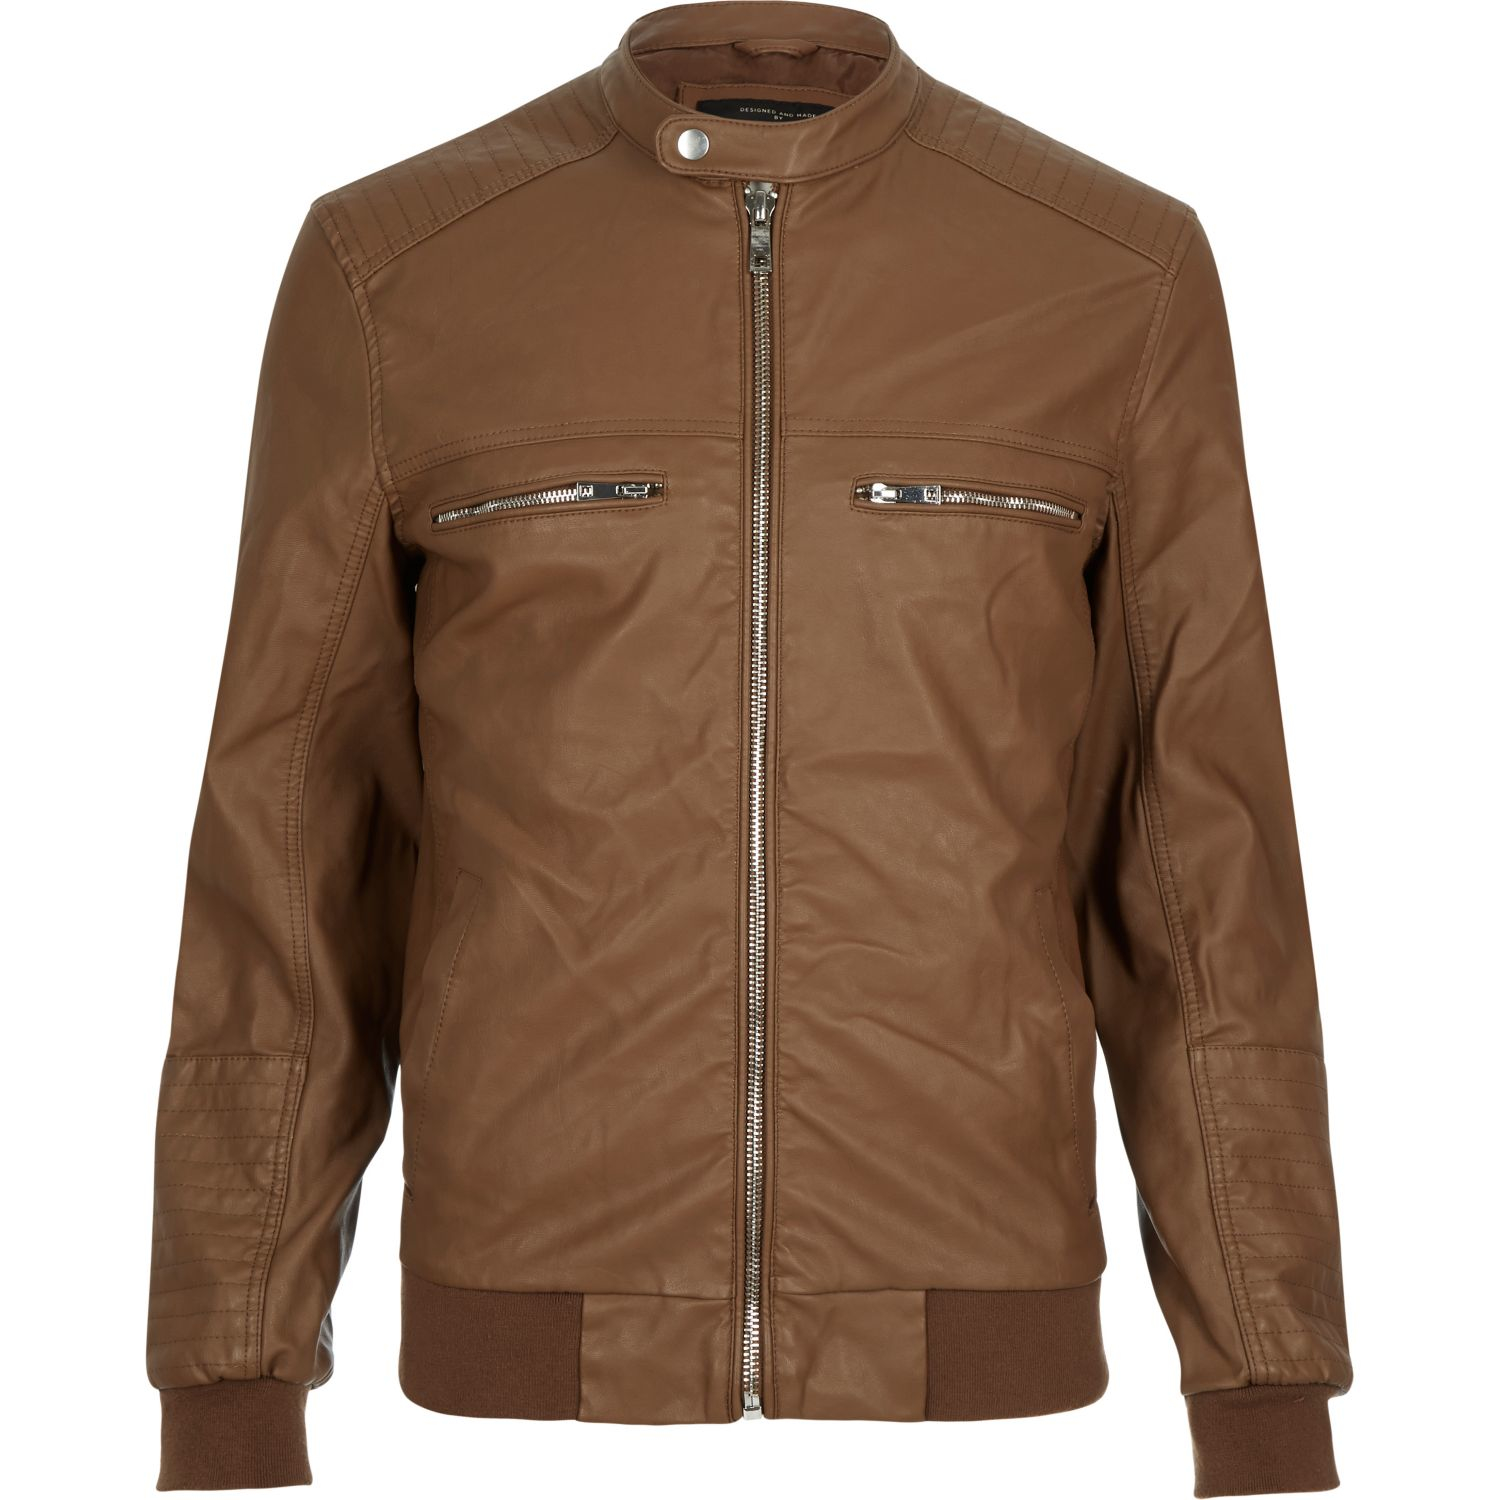 Lyst - River Island Light Brown Leather-look Bomber Jacket in Brown for Men